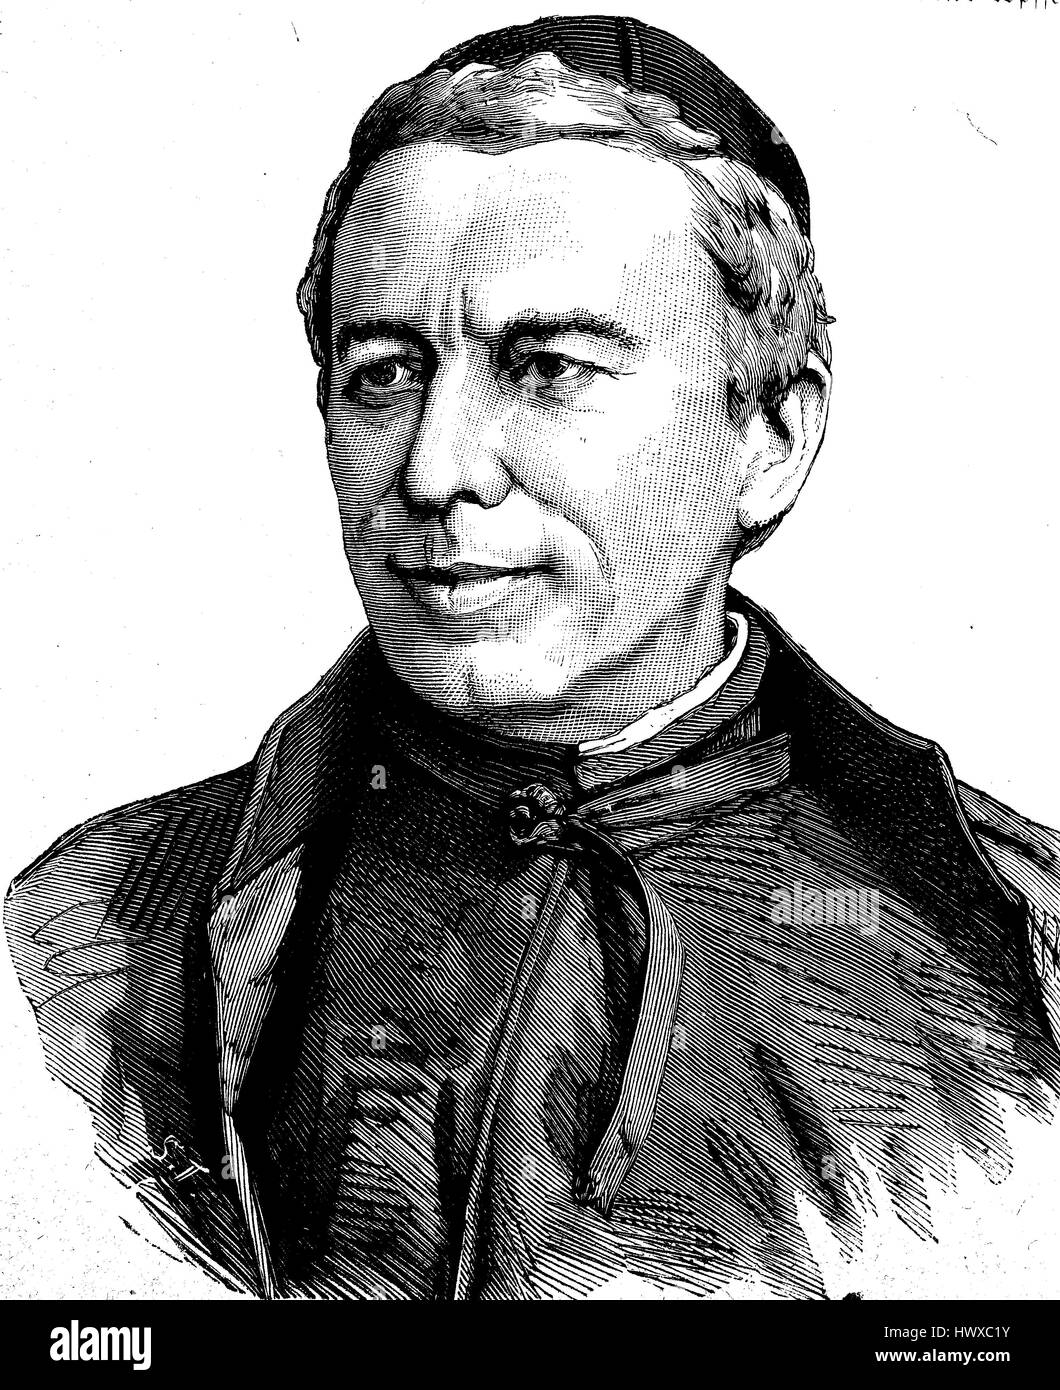 Fr. Pietro Angelo Secchi, 29 June 1818 - 26 February 1878, was an Italian astronomer and was a pioneer in astronomical spectroscopy, Italy  , reproduction of an image, woodcut from the year 1881, digital improved Stock Photo